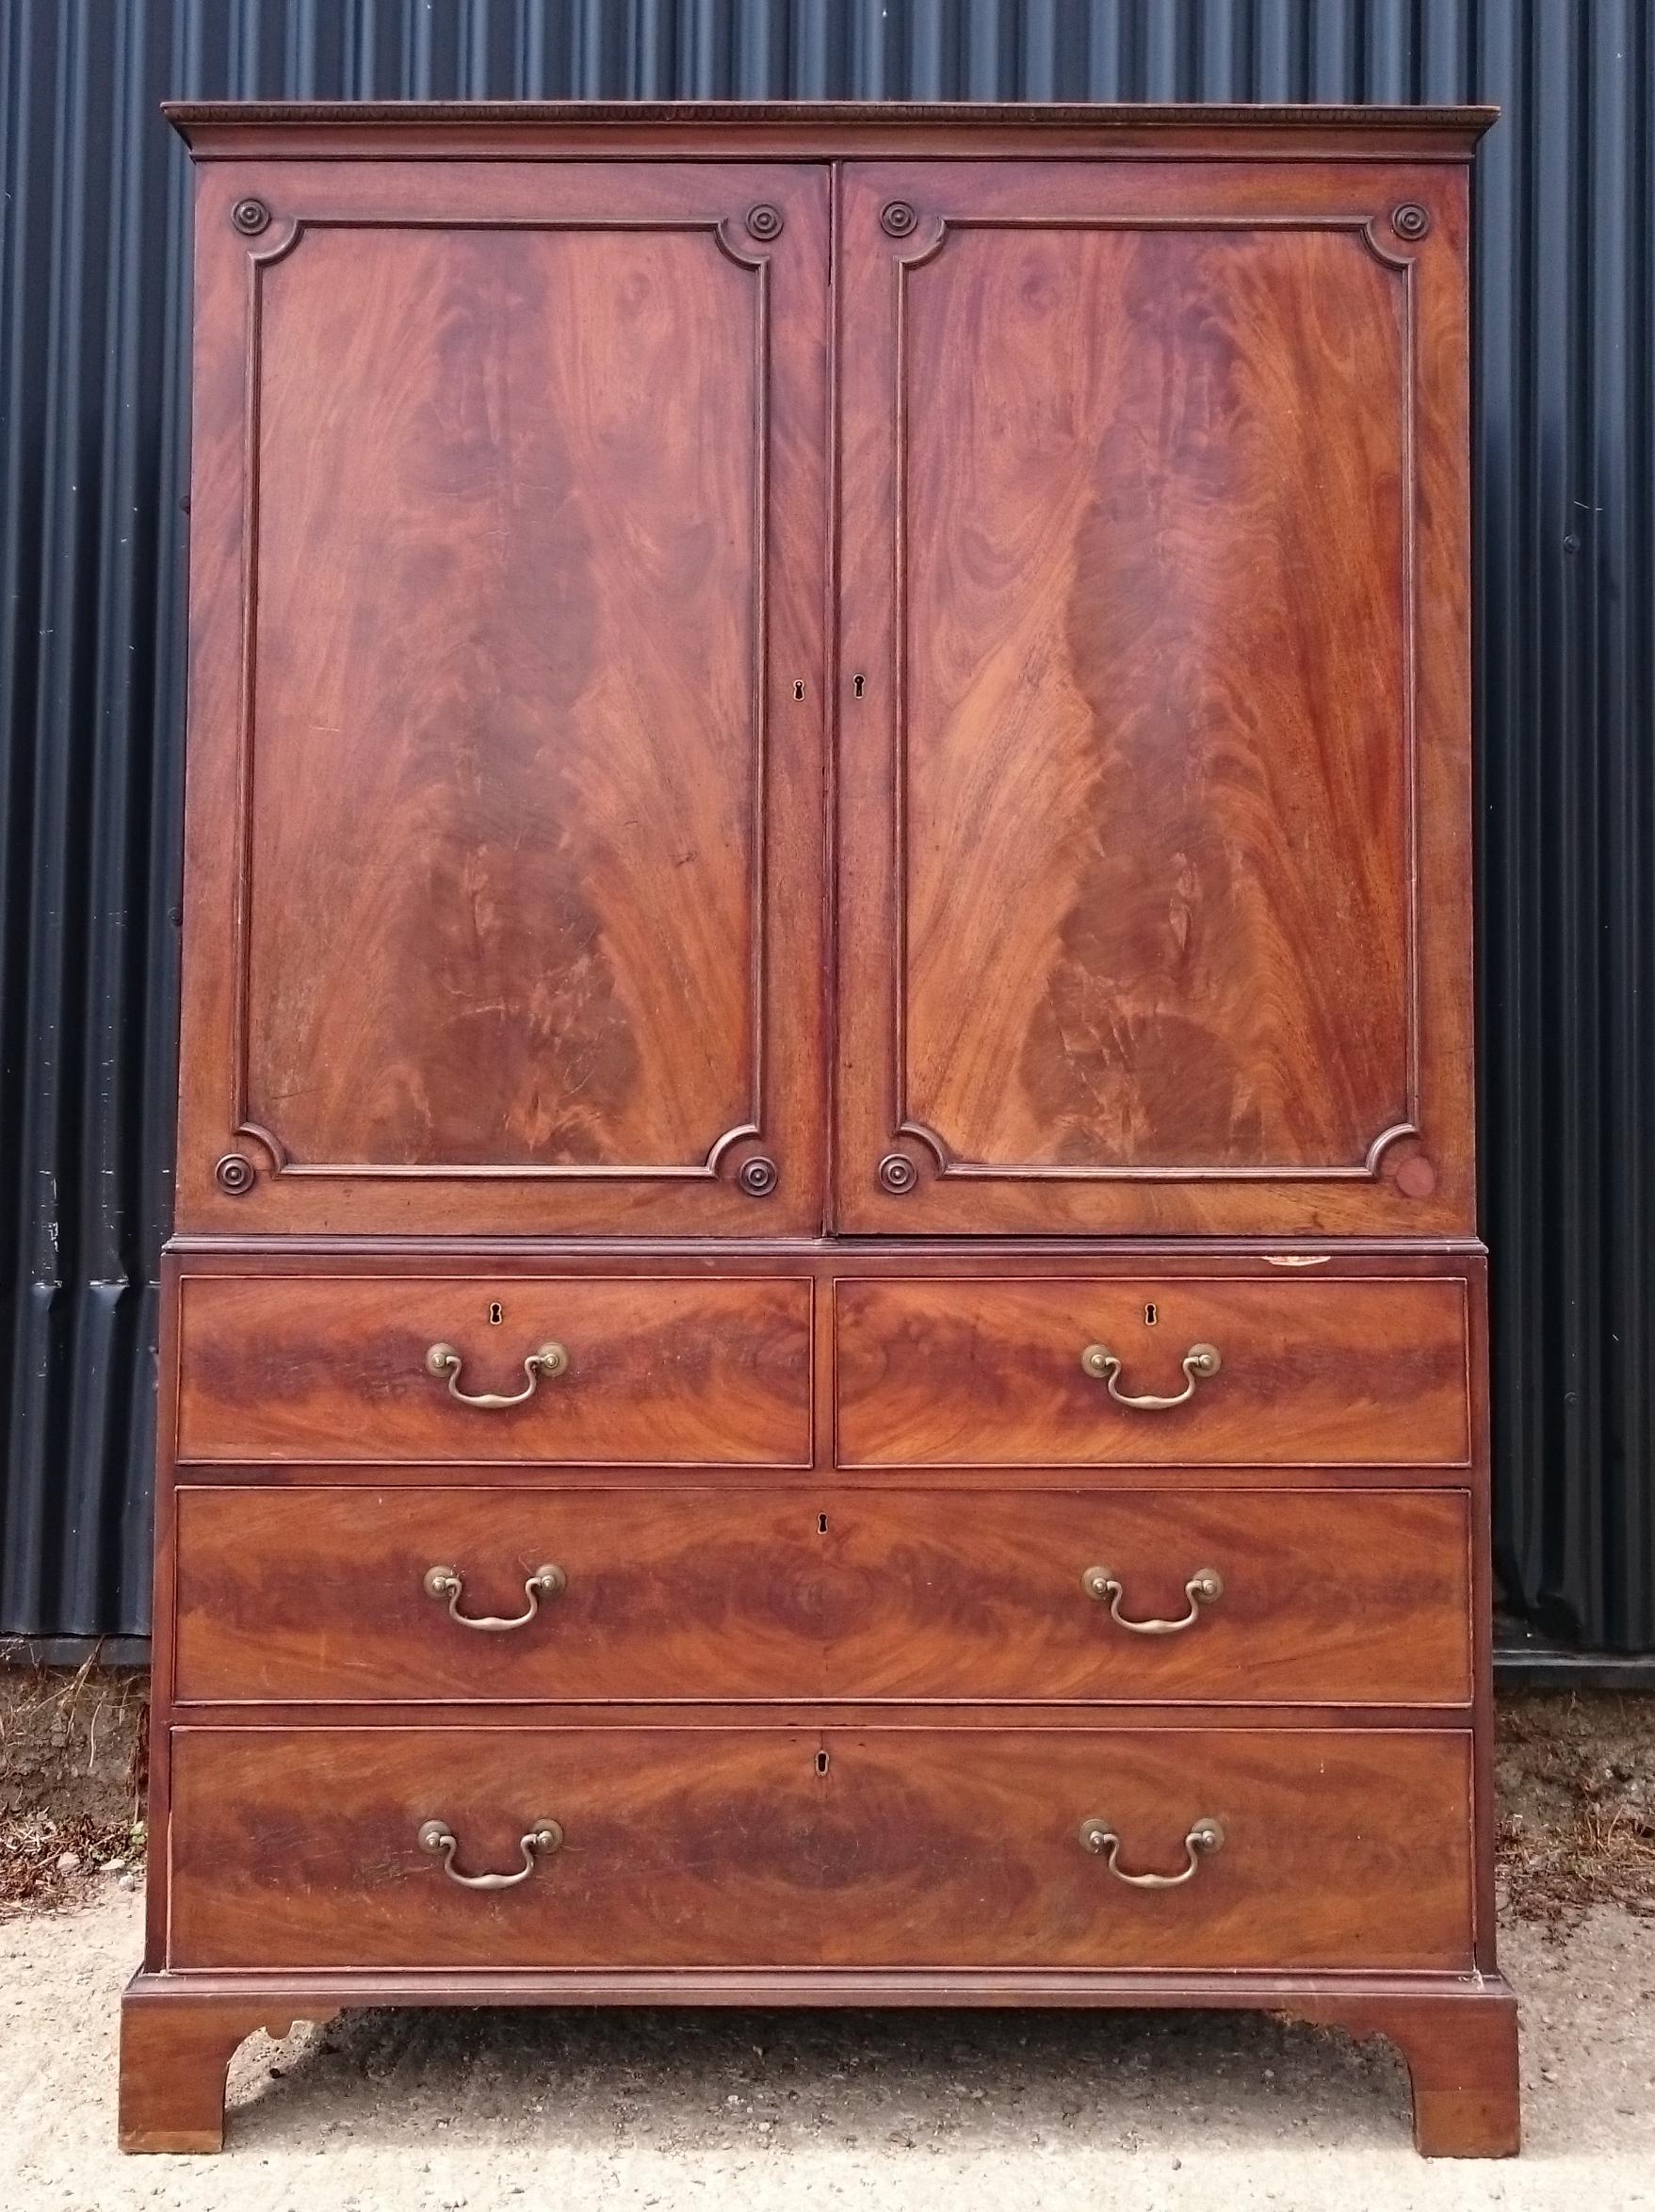 Very fine quality and very heavy George III period mahogany antique linen press. This linen press has all its sliders, it is made of exceptional quality mahogany and it has faded to a beautiful golden brown colour. The price includes restoration if